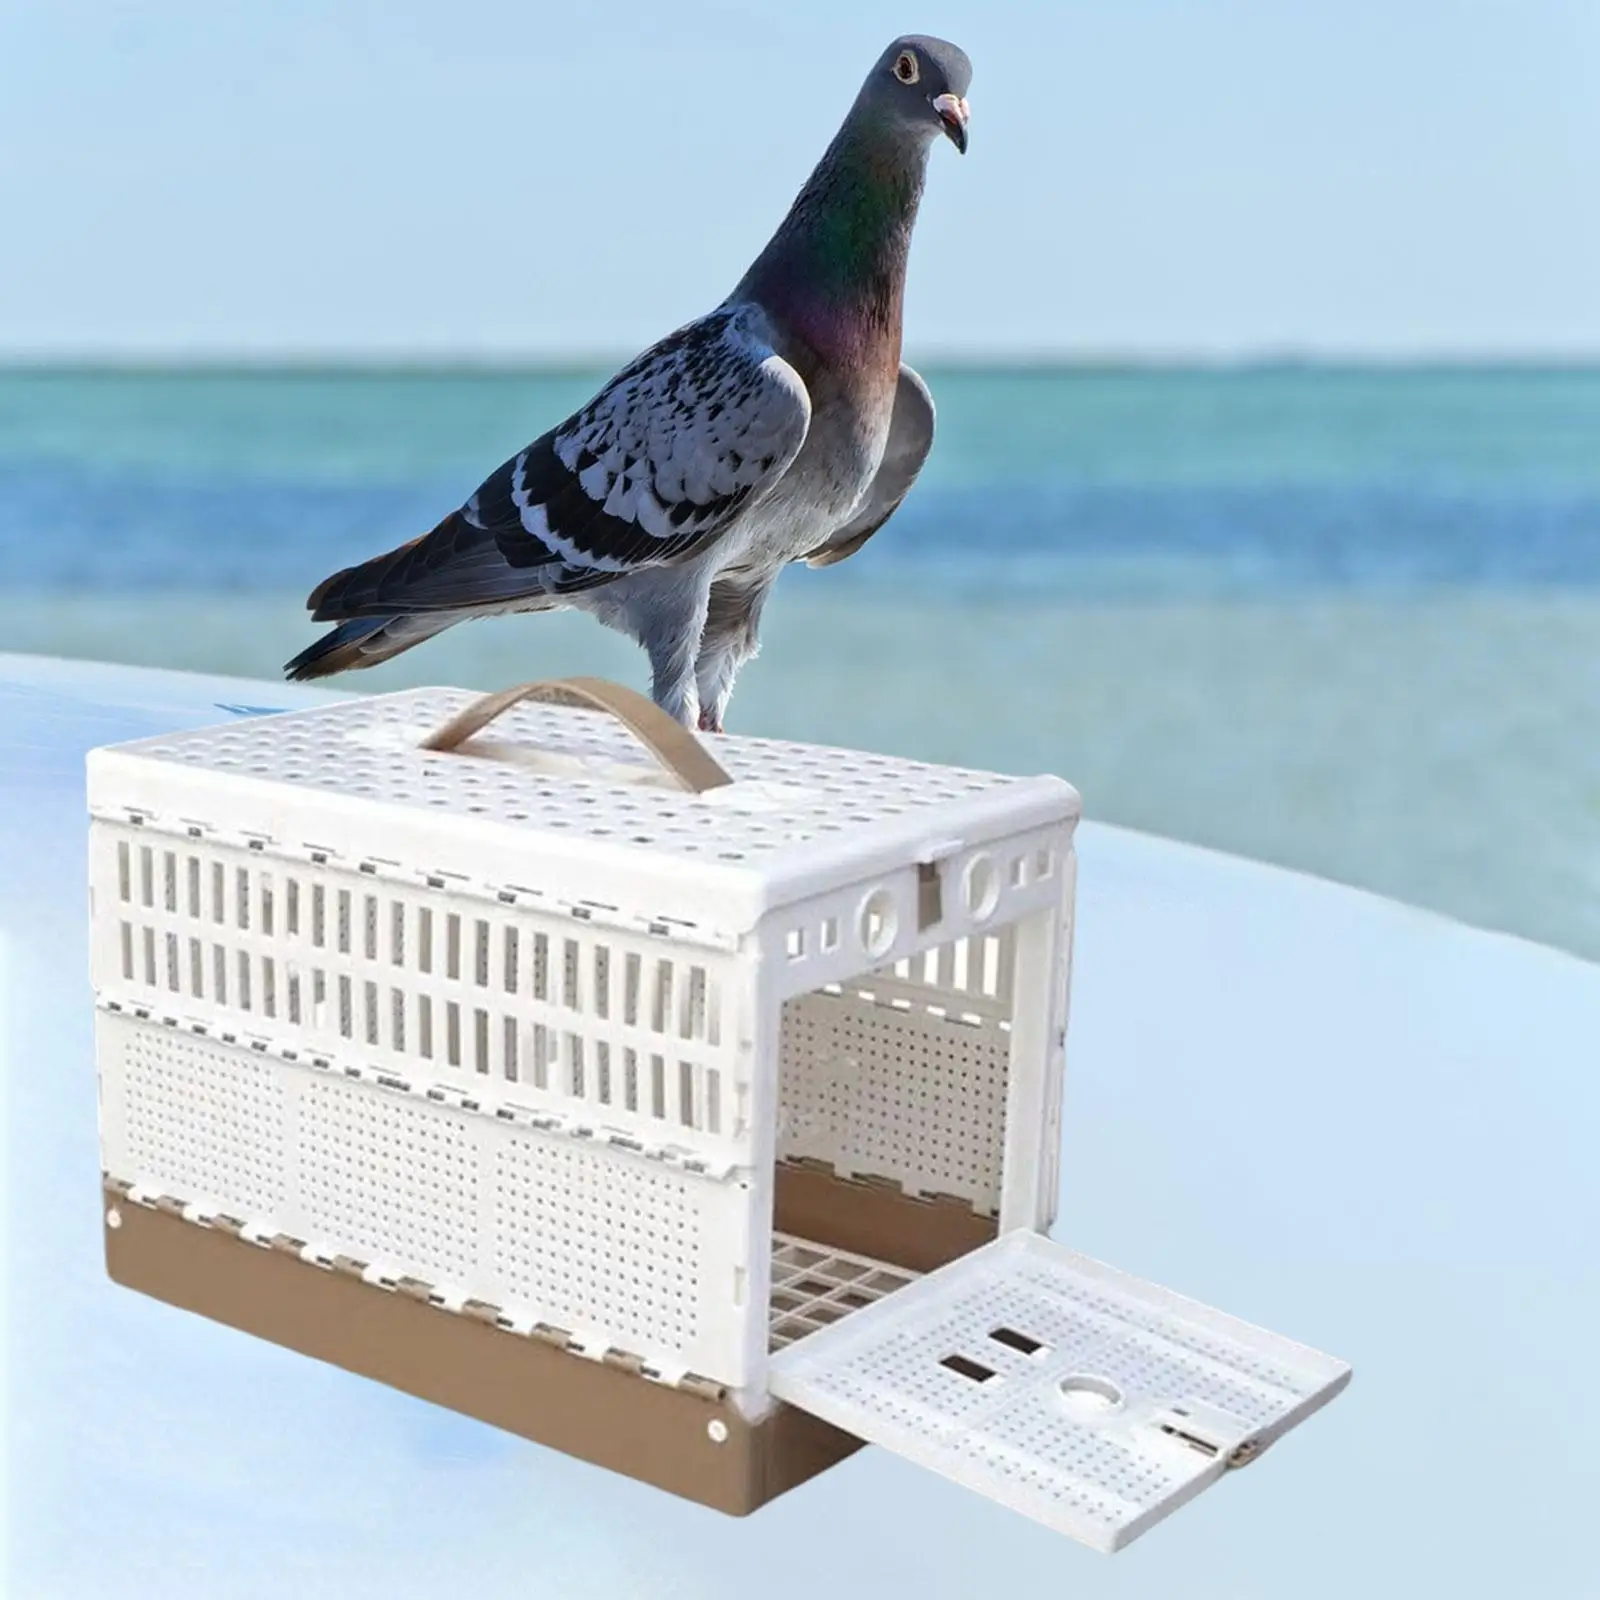 Lightweight Pigeon Cage Parakeet Cage Poultry Bird Cage Folding Pairing Cage Box Small Animal Pigeon Training Cage for Travel